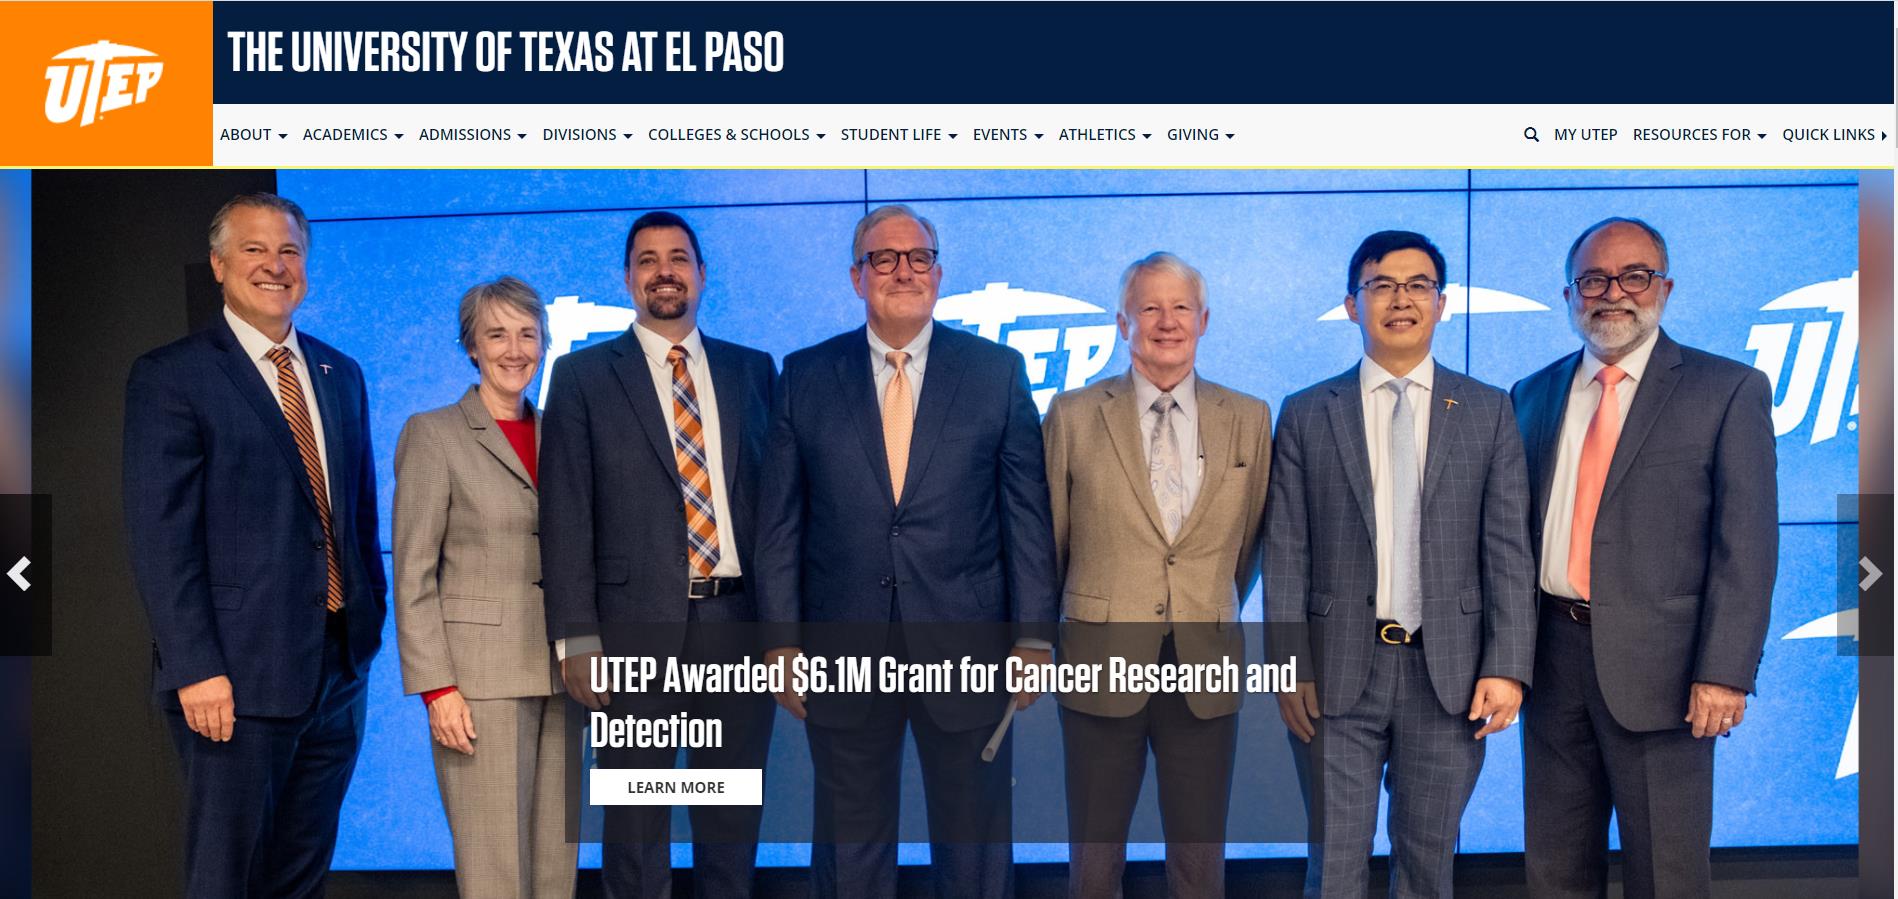 CPRIT grant featured in a UTEP press release 